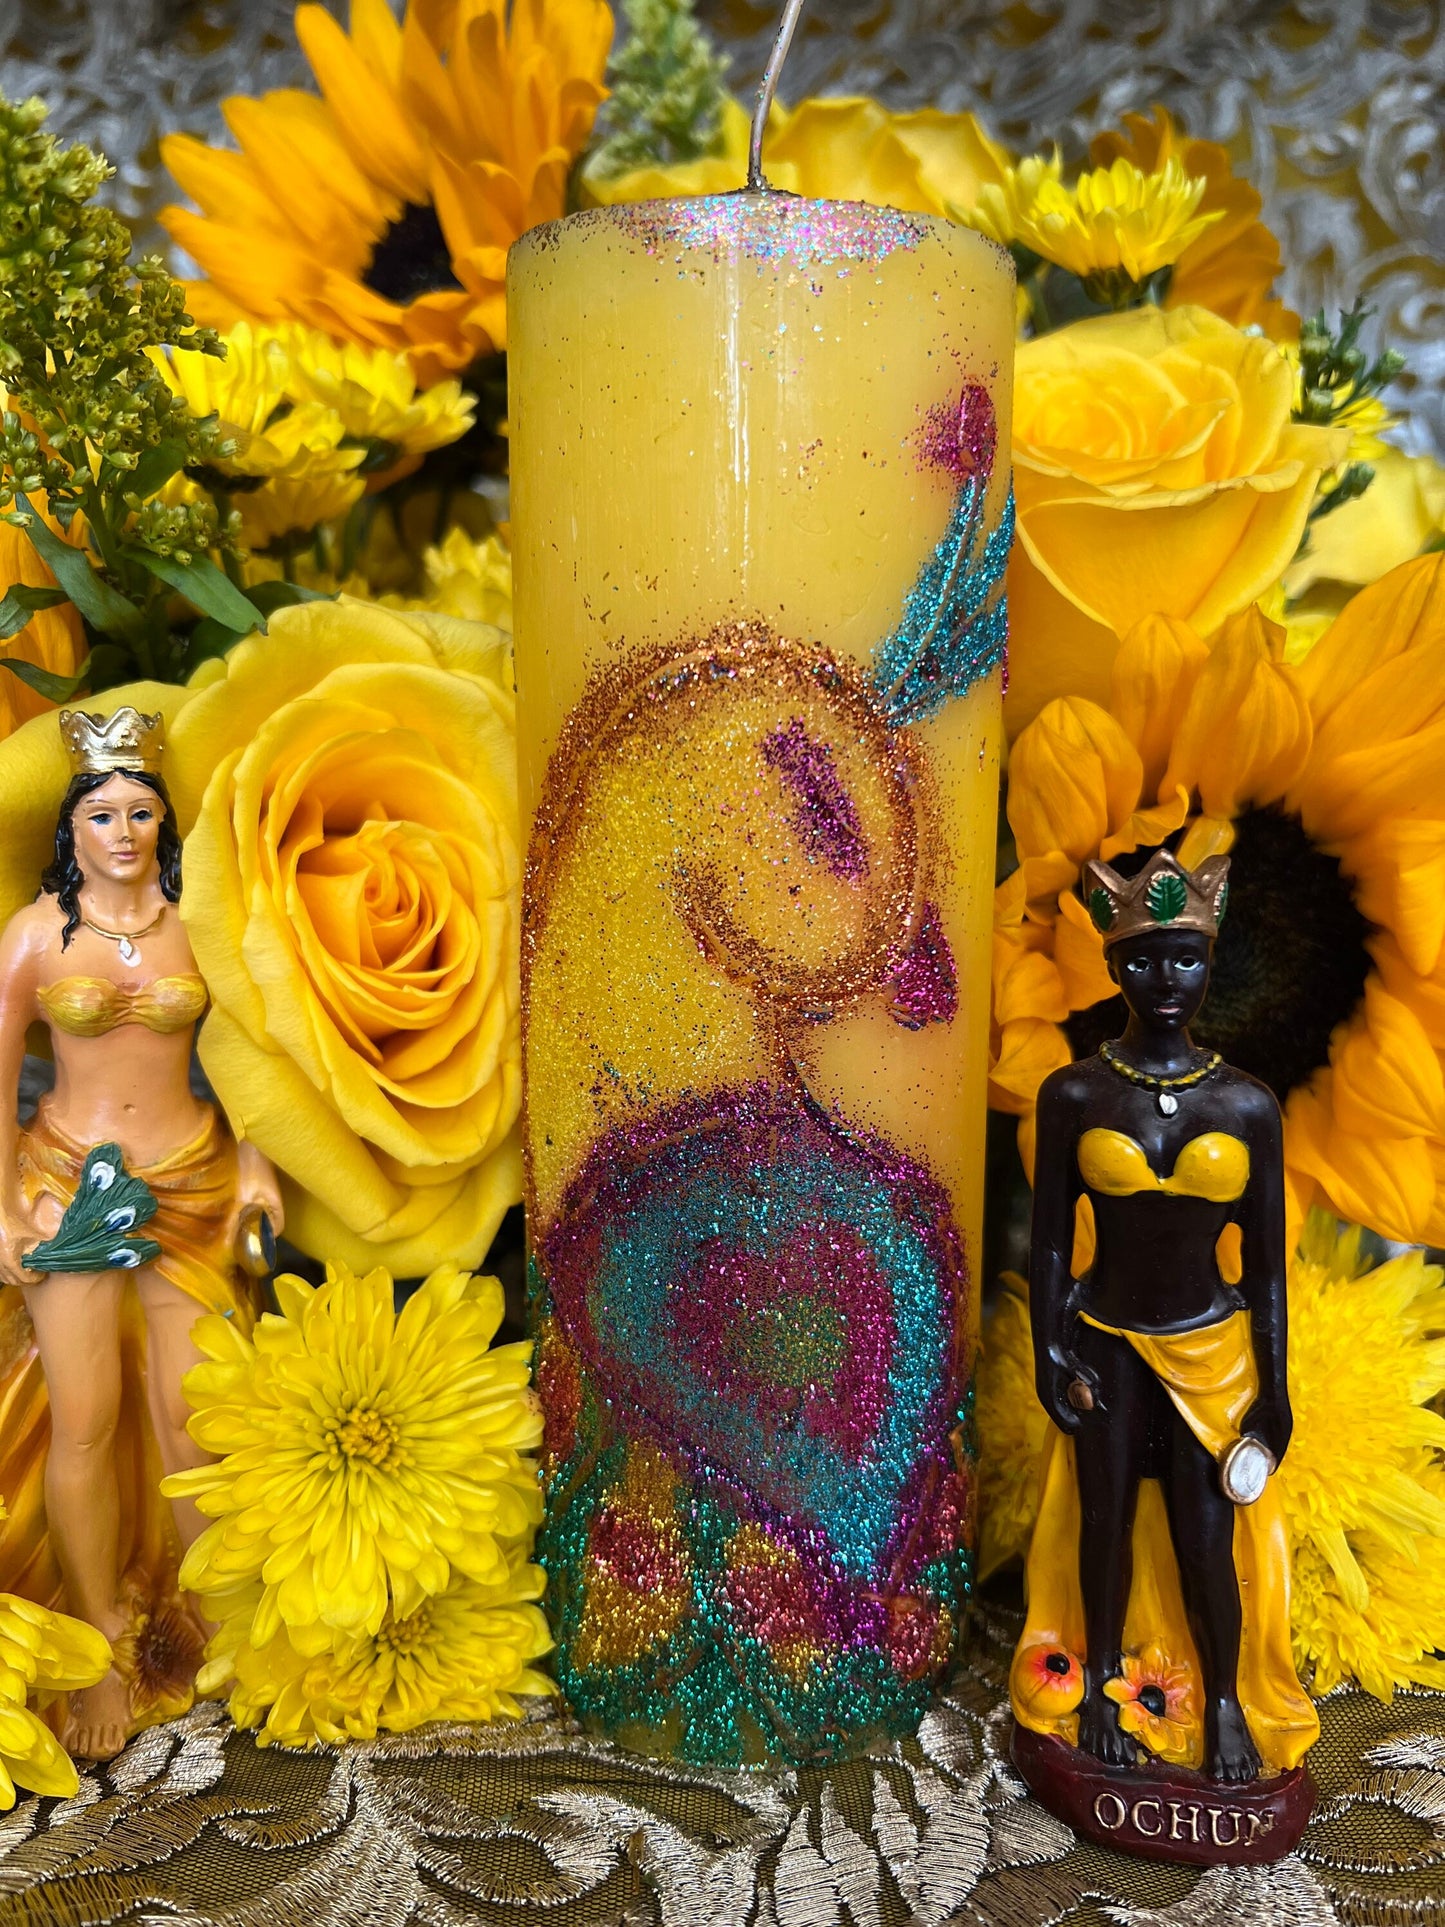 Oshun Hand Carved Candle